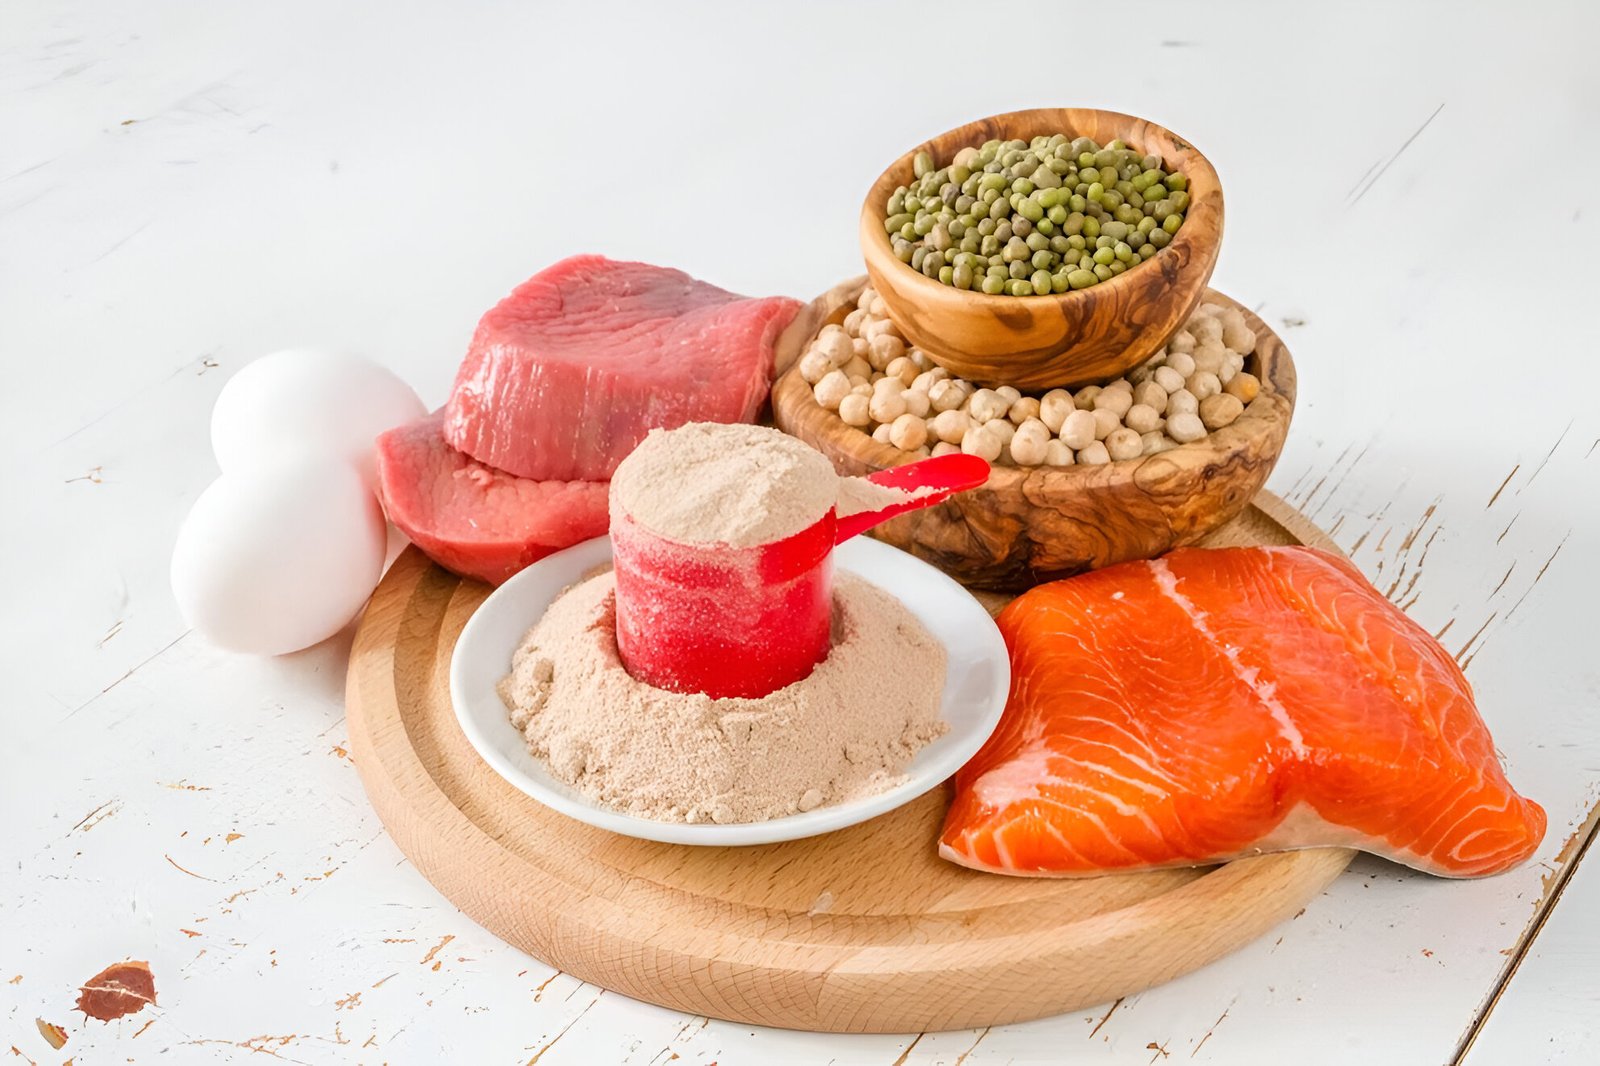 How Much Grams Of Protein Required On Keto Diet?